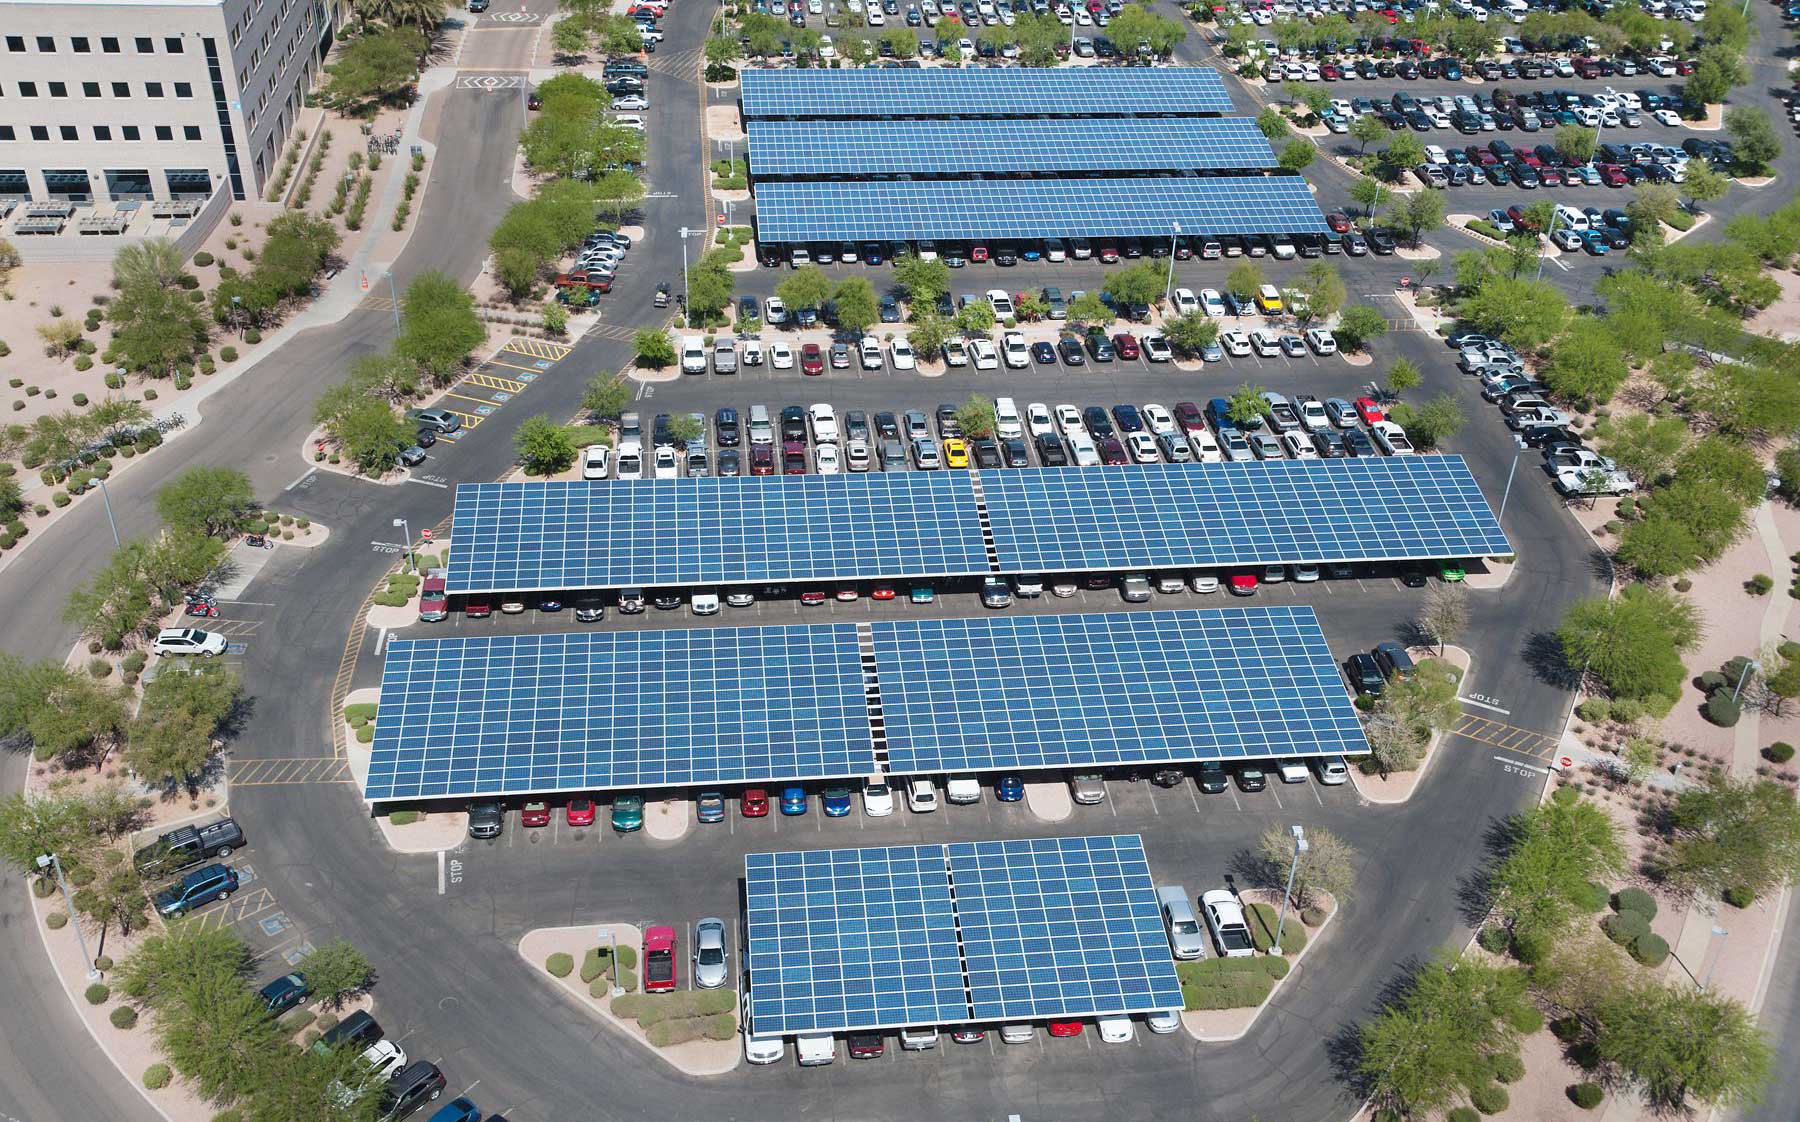 Photograph of a parking lot in Arizona that is partially covered with platforms. The platforms have solar panels on the roofs.